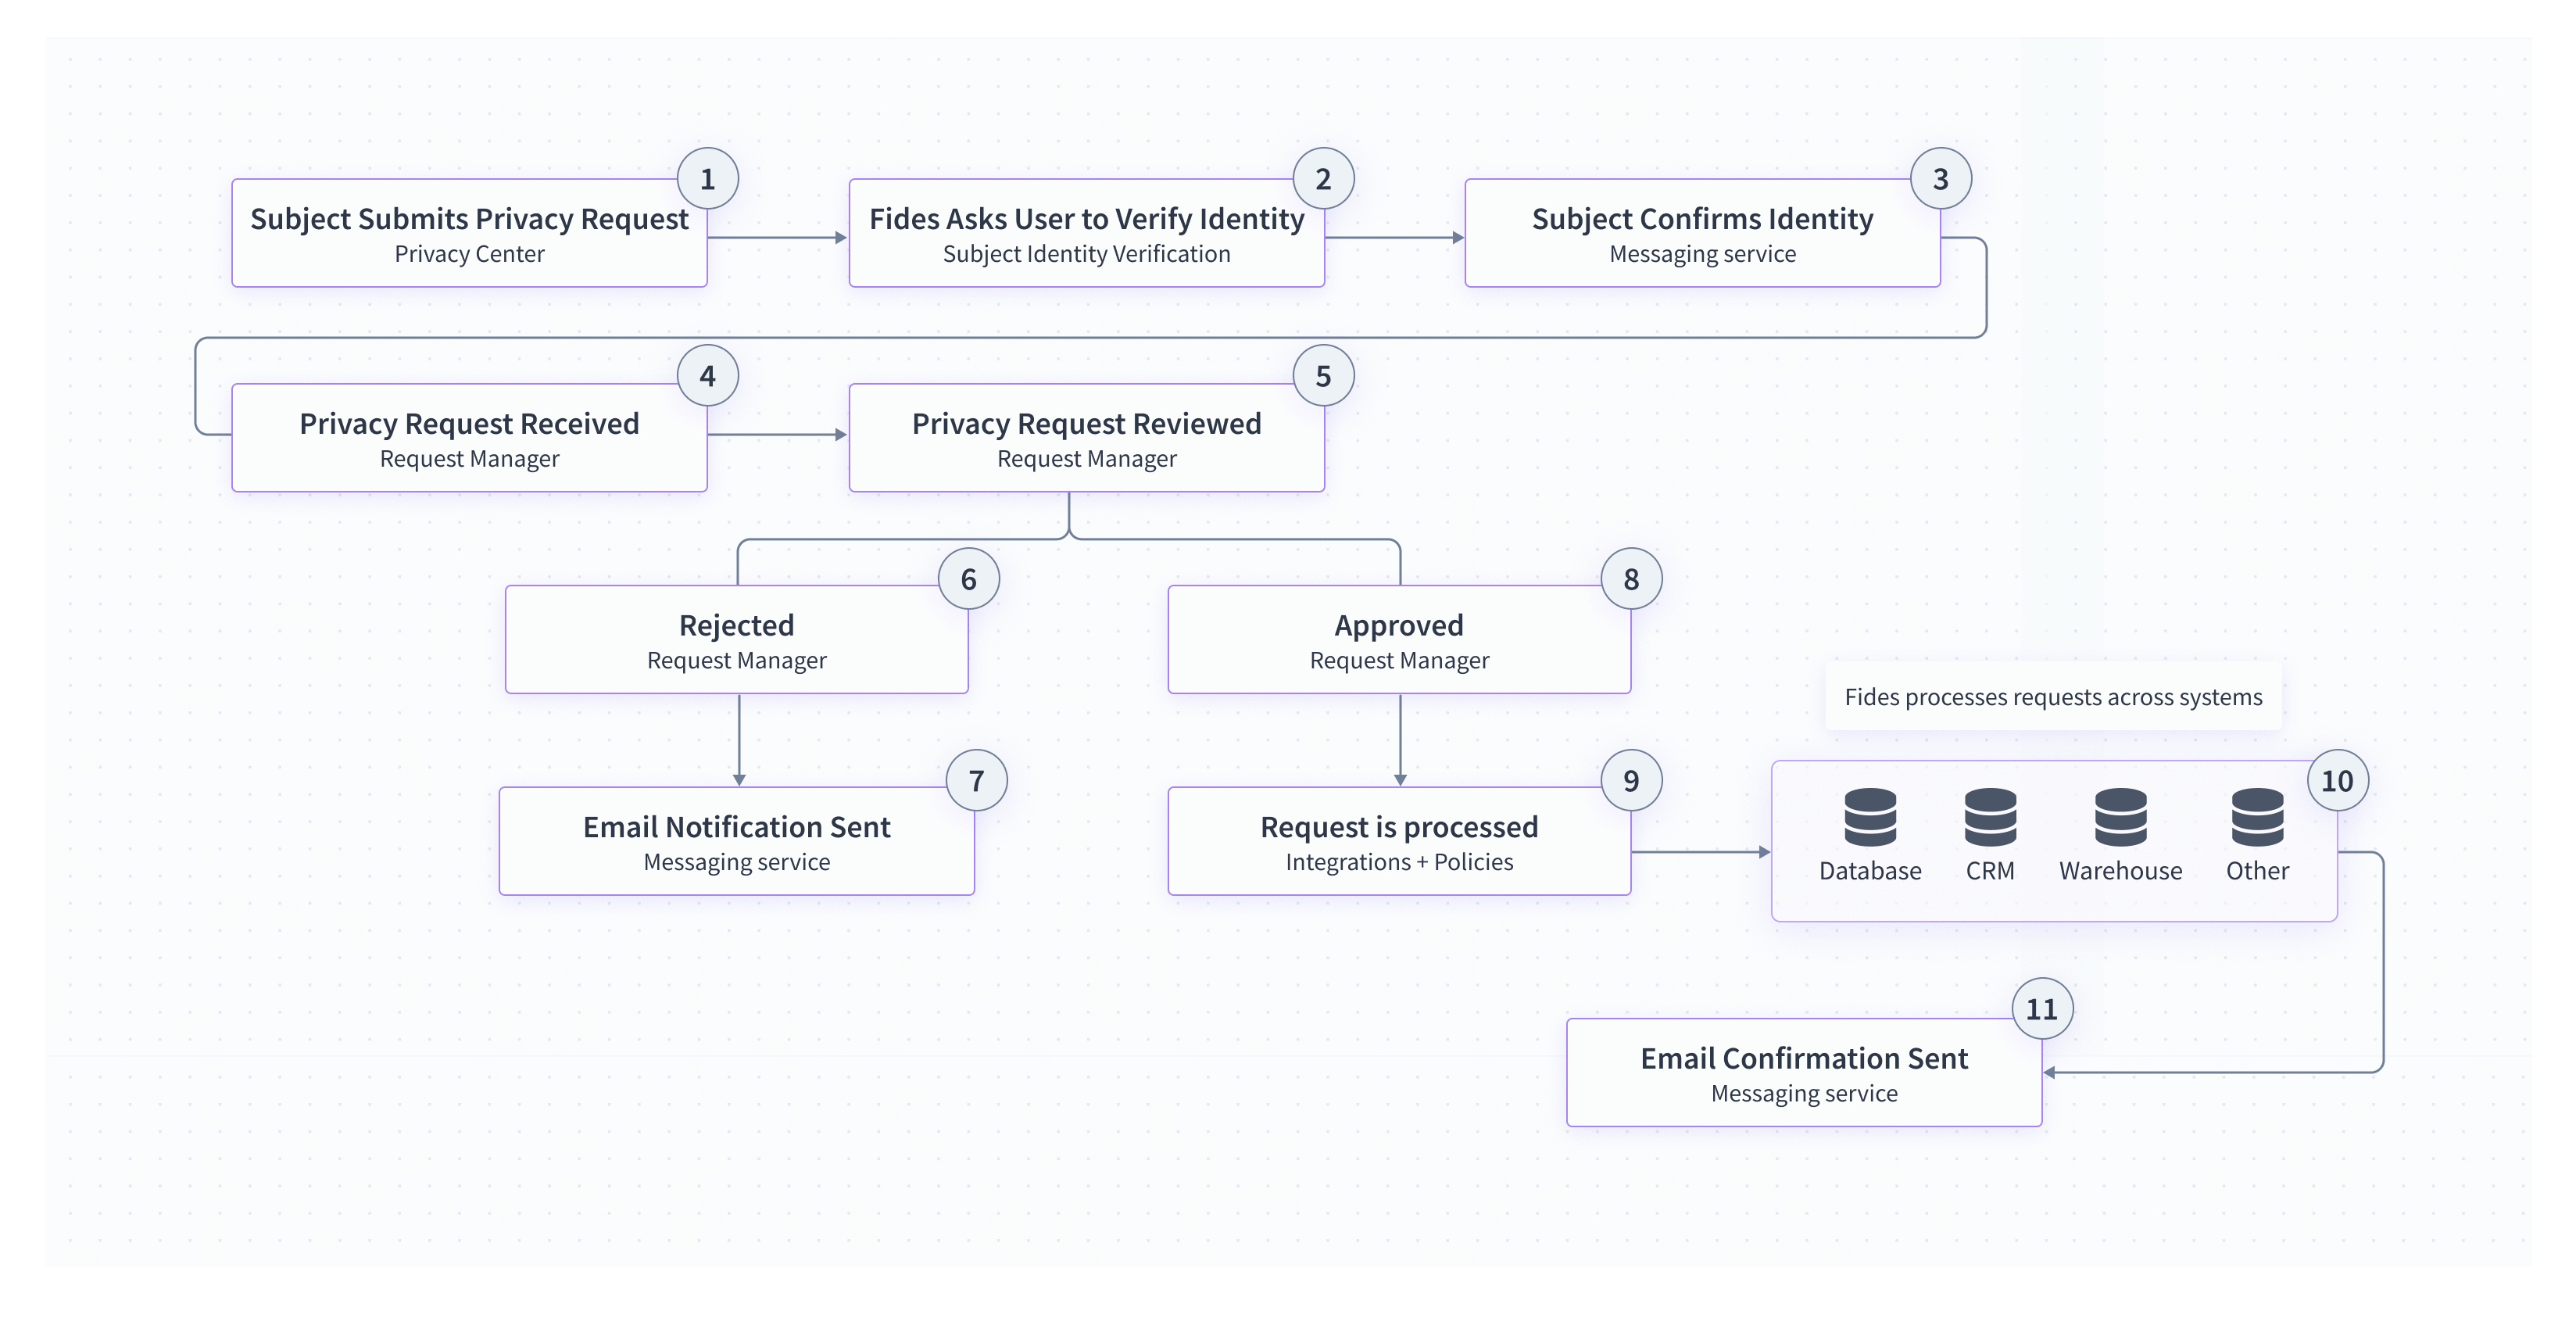 The privacy request workflow